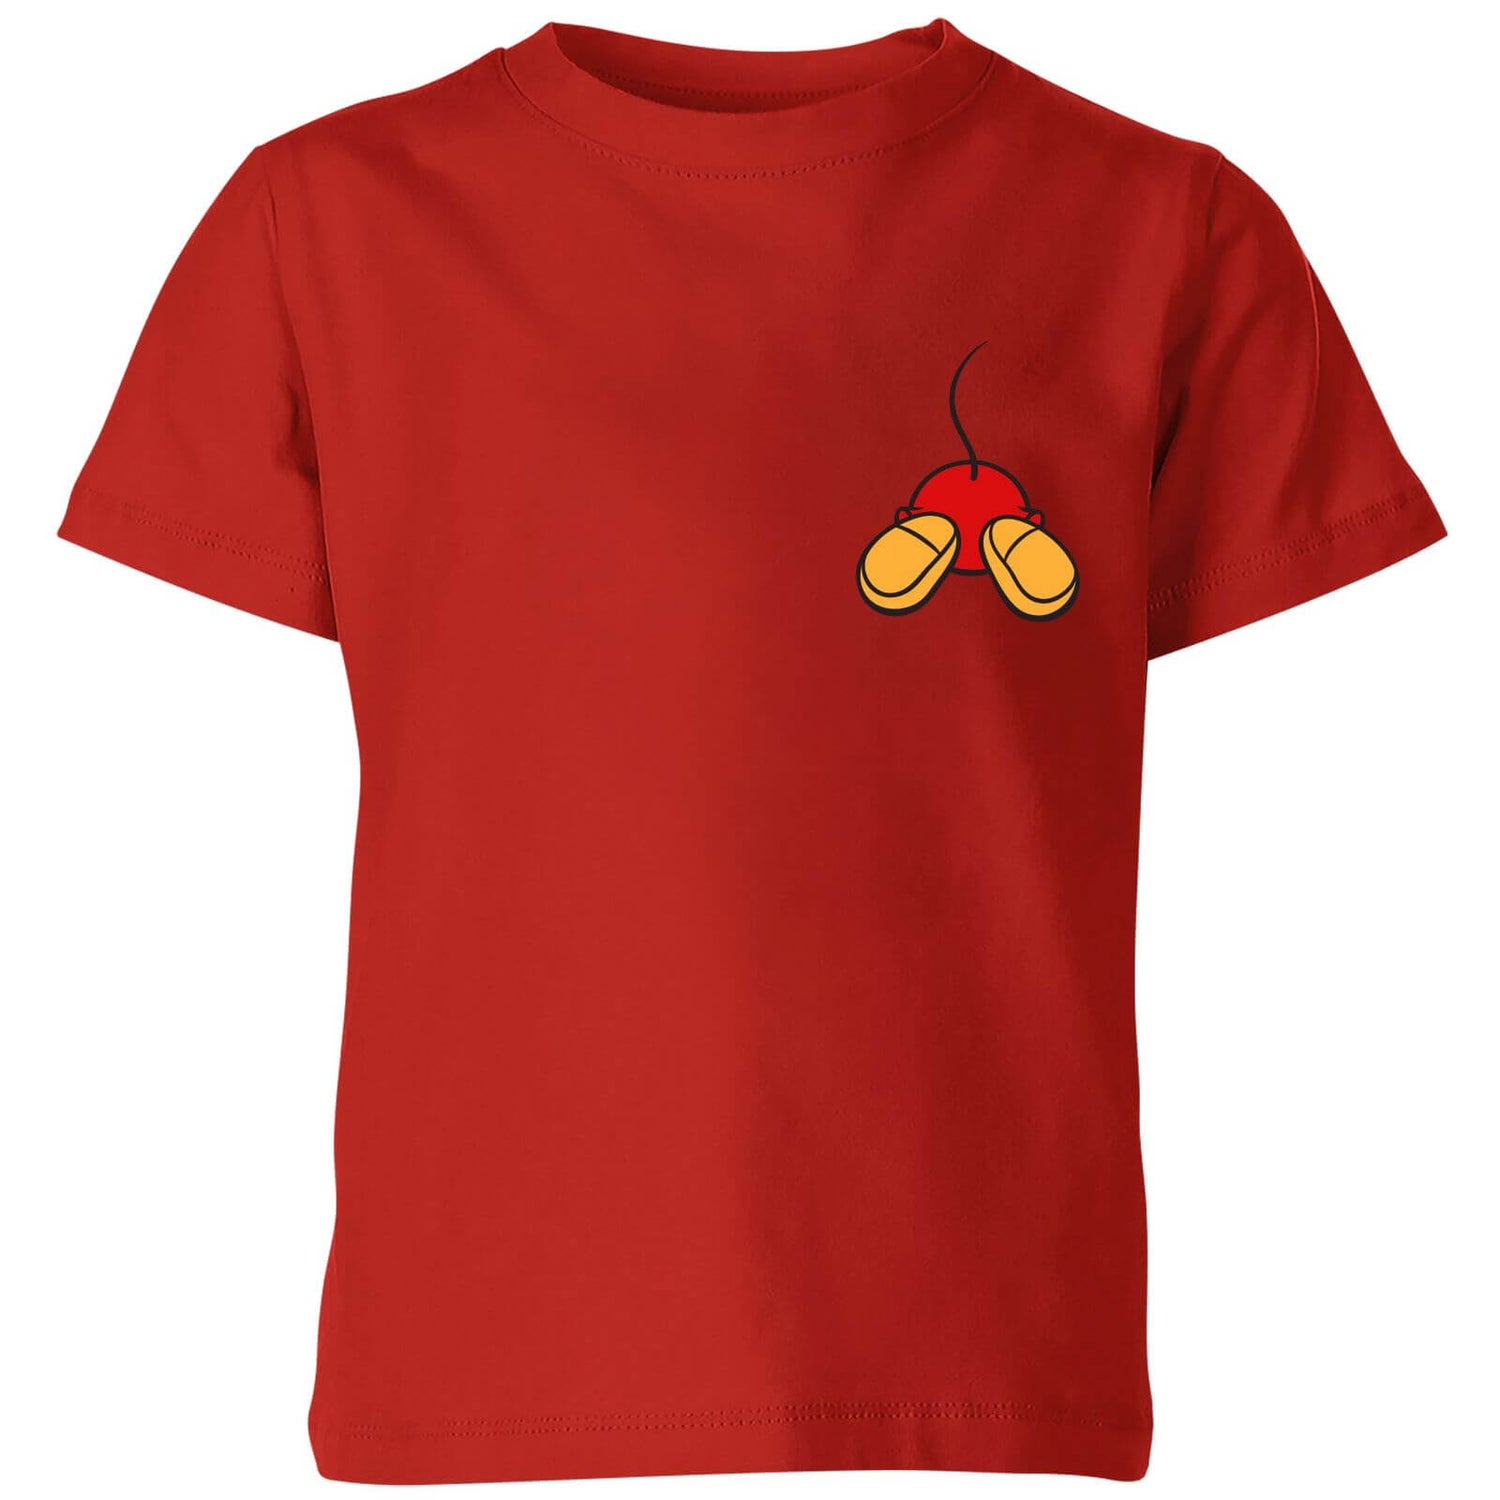 Disney Mickey Mouse Backside Kids' T-Shirt - Red